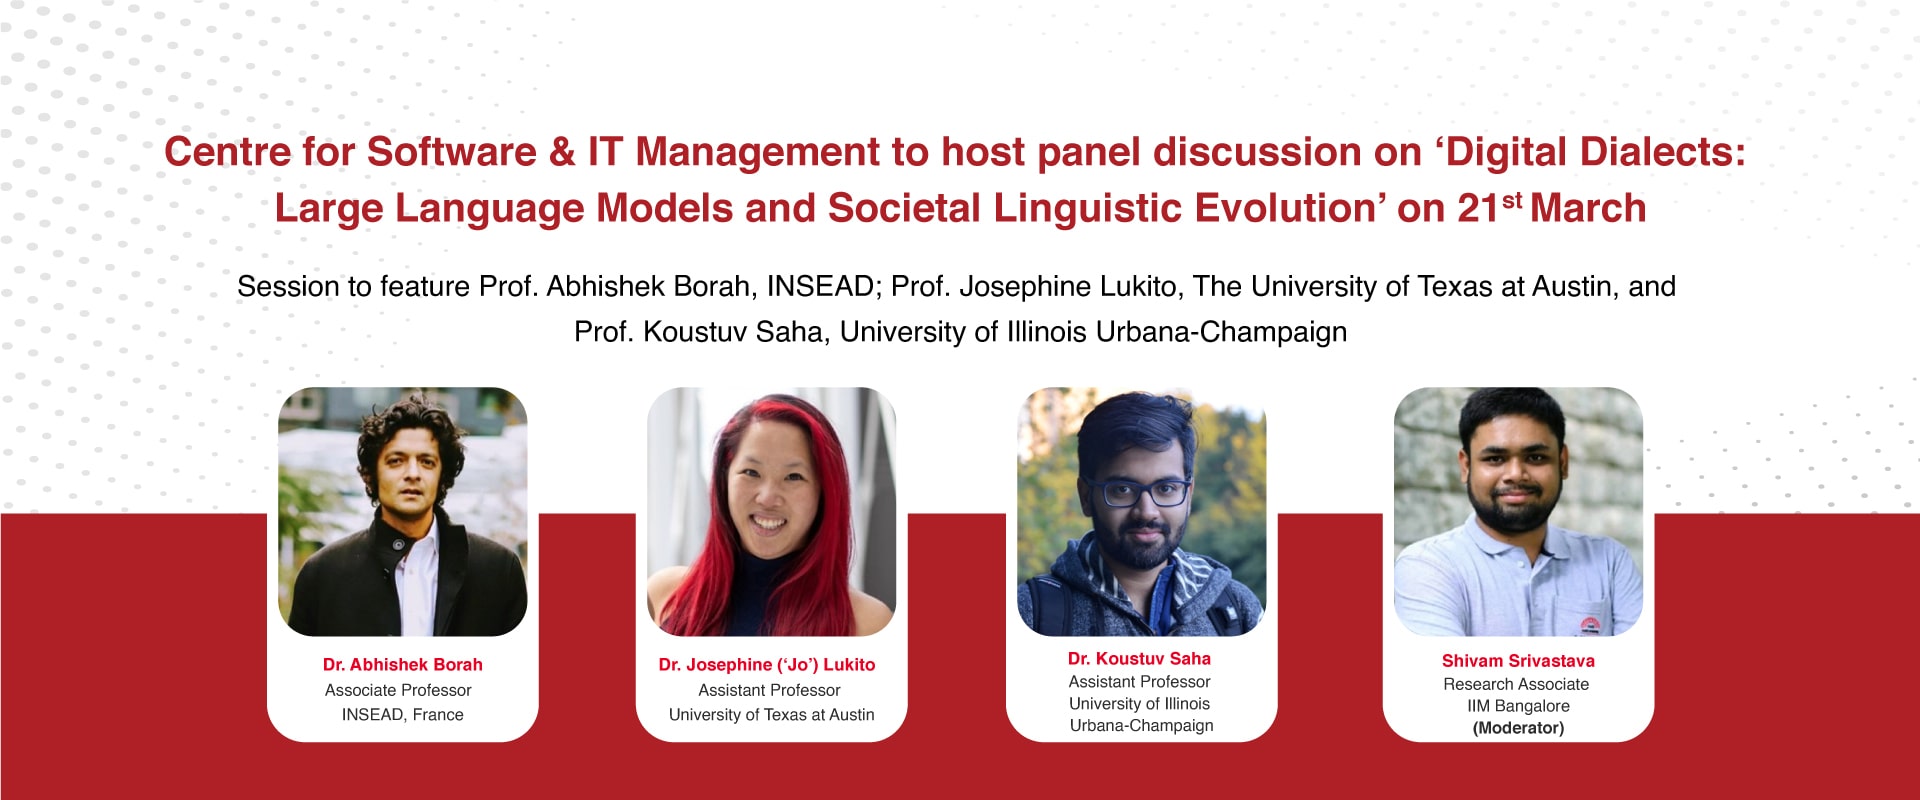 Centre for Software & IT Management to host panel discussion on ‘Digital Dialects: Large Language Models and Societal Linguistic Evolution’ on 21st March